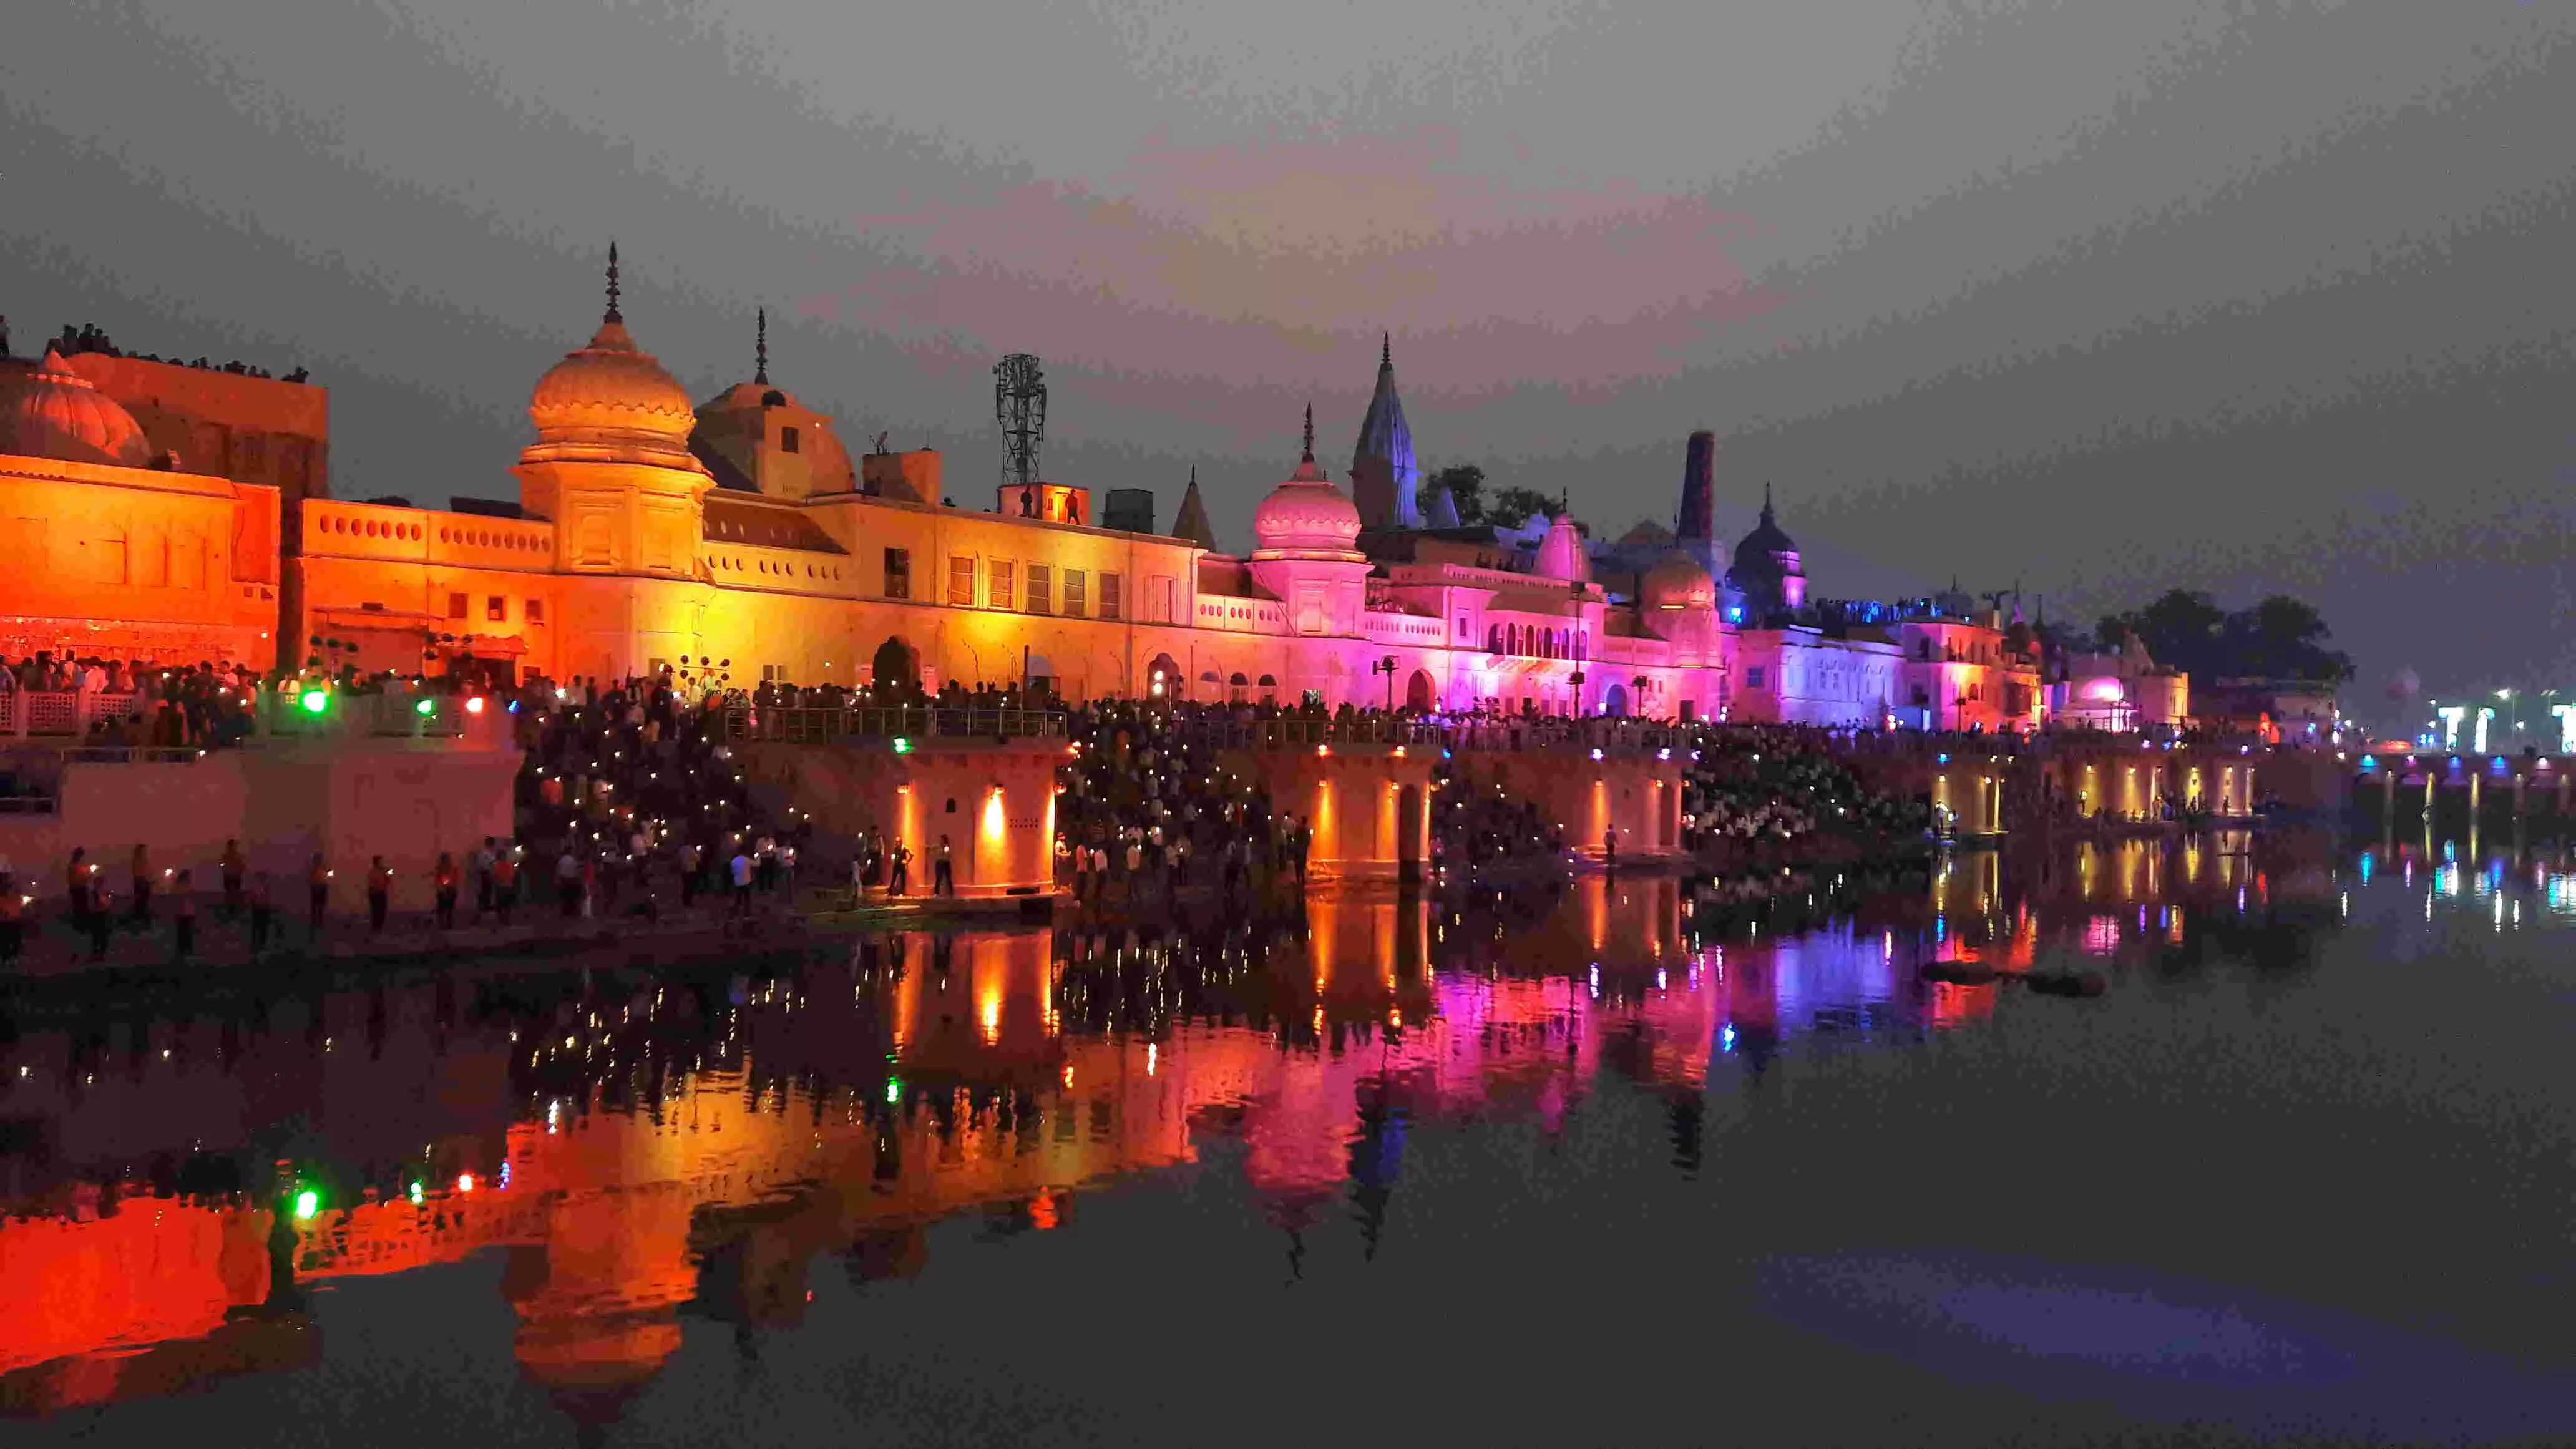 PM Modis Roadshow in Ayodhya: 100 Quintals of Flowers to Shower, Ram Temple Gateway Decorated, Whats Special?